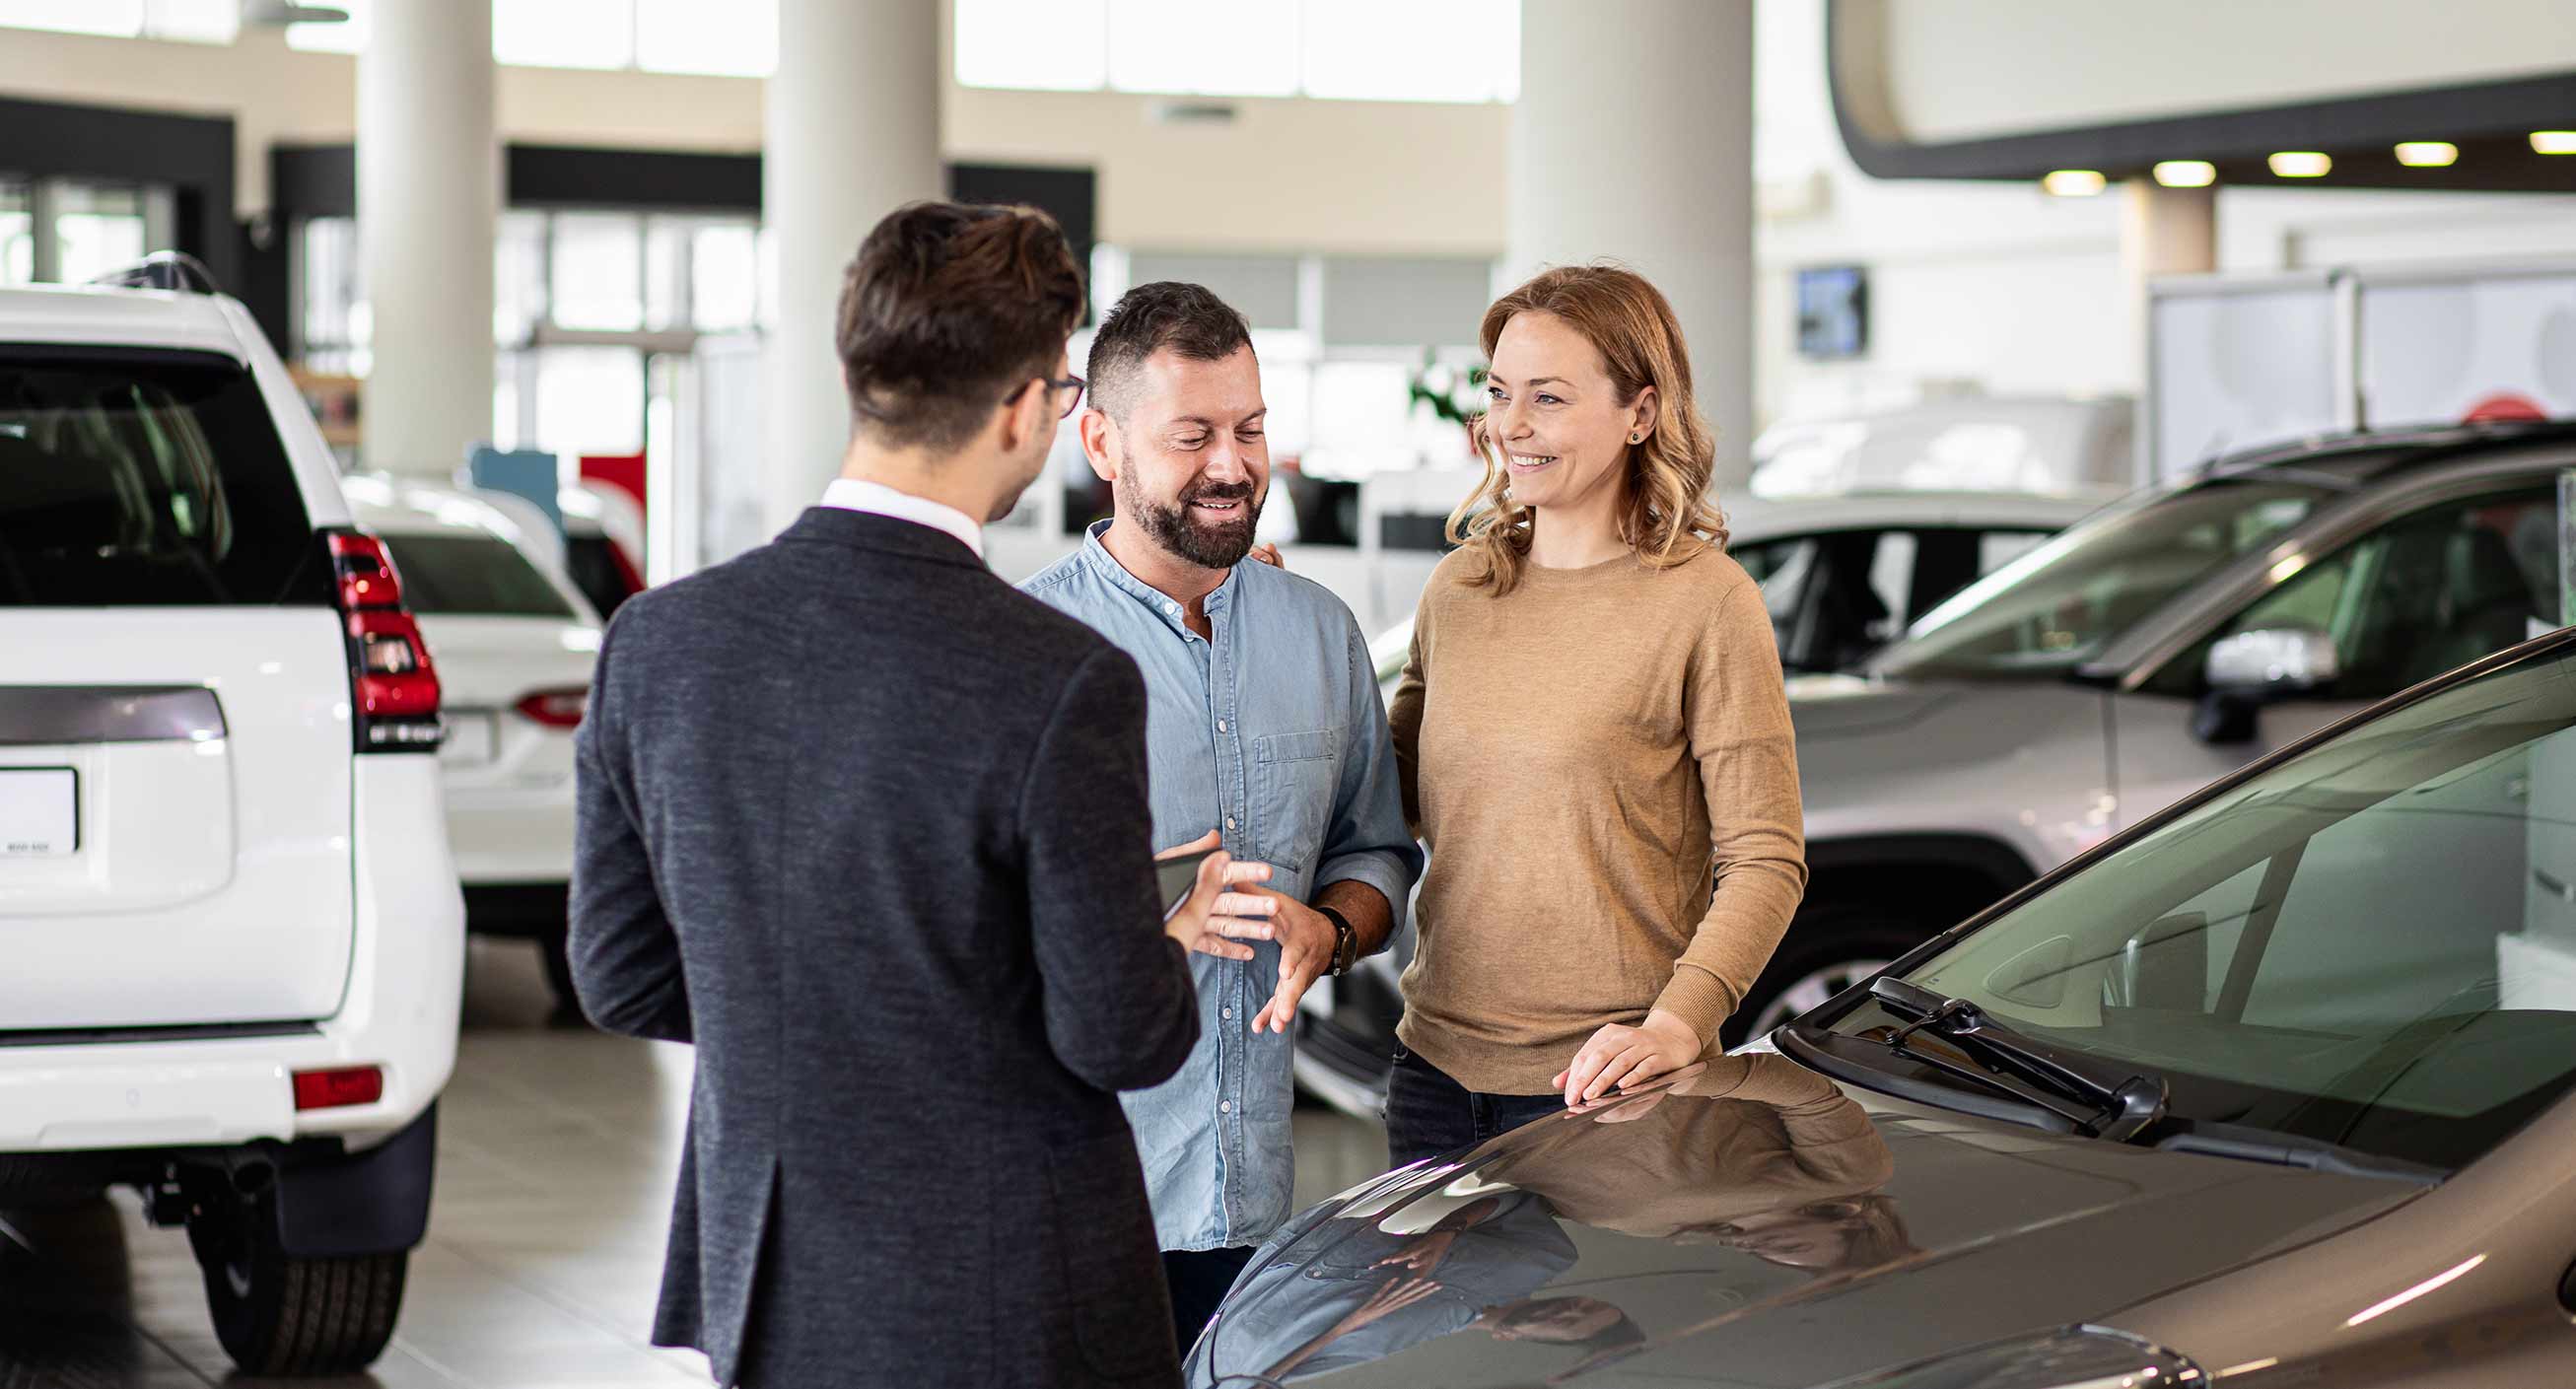 A couple talks to a salesman at a car dealership, indicating they are buying a car that’s within their budget in order to start saving money.